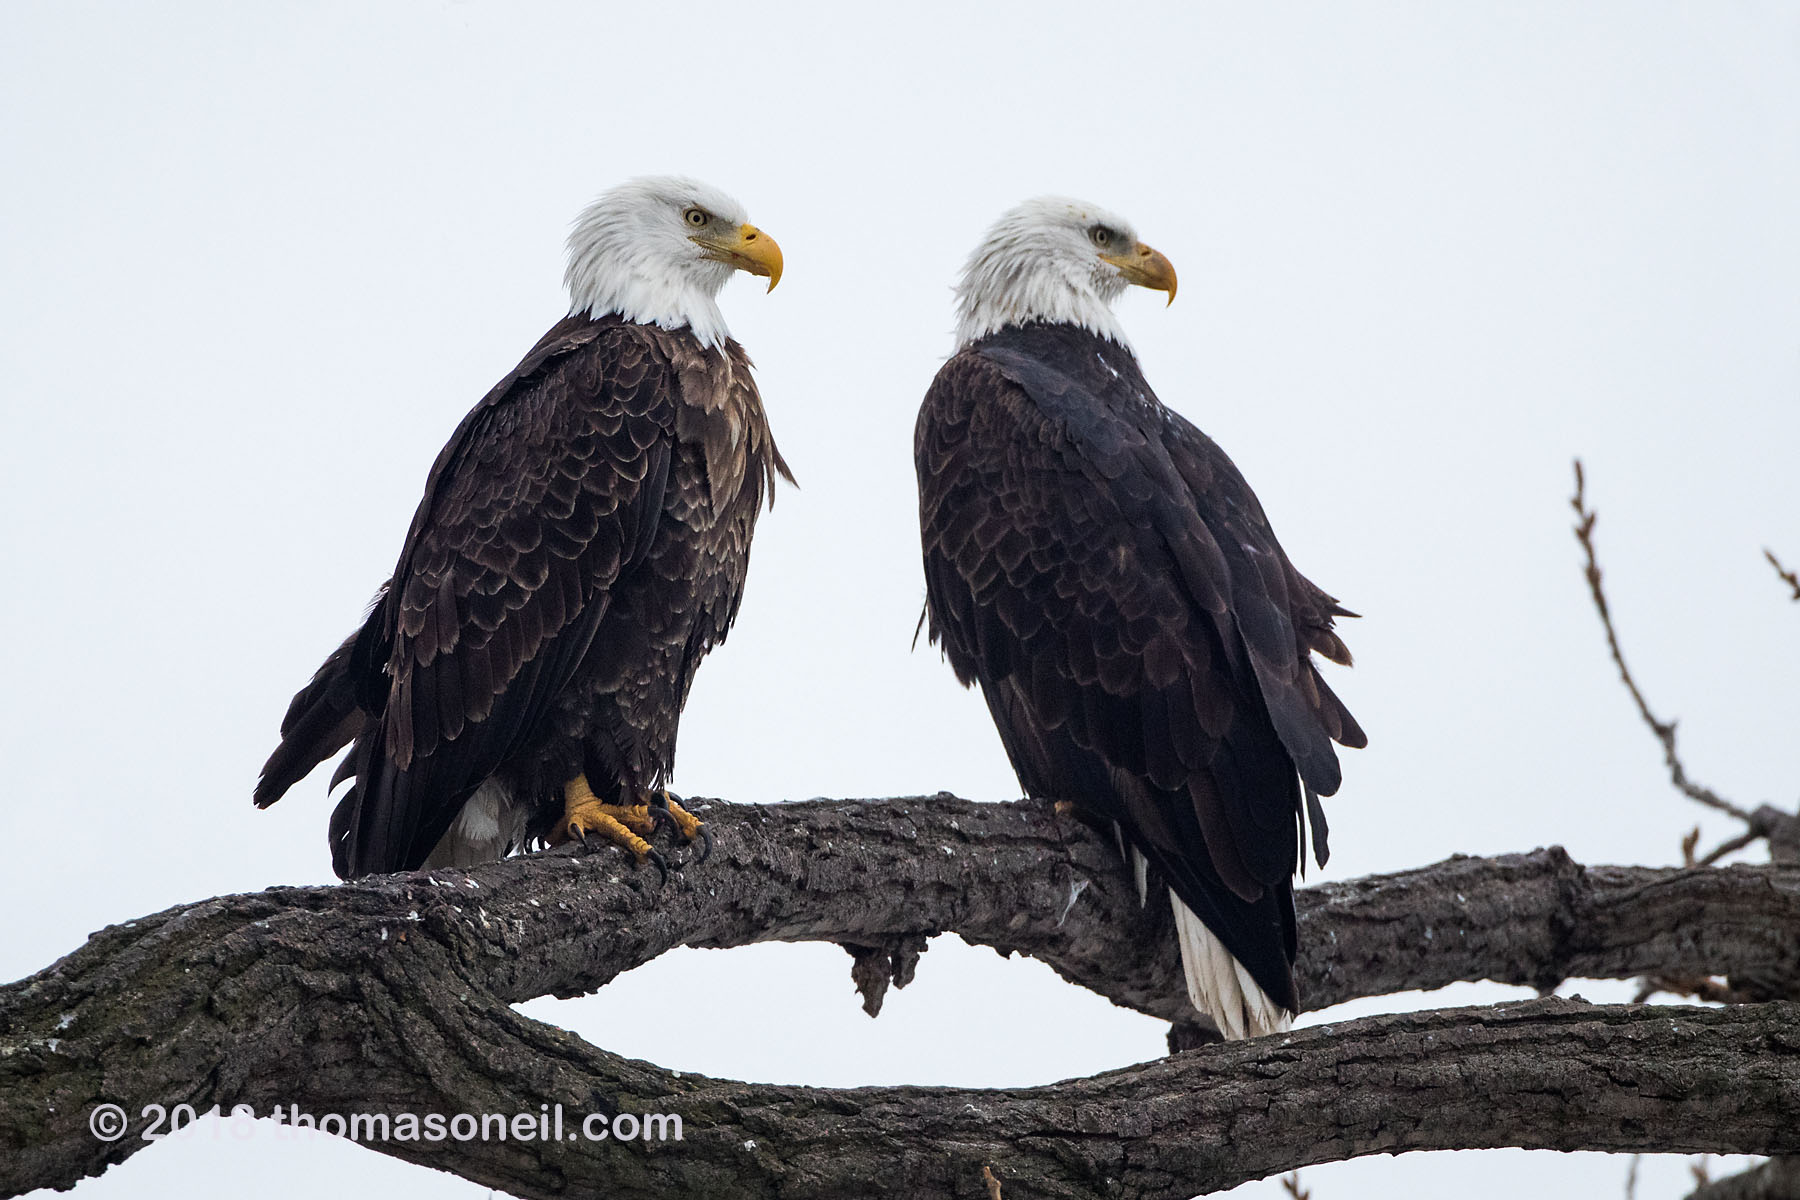 Bald eagles, Keokuk, Iowa, January 2018.  This image was taken with Canon M100 on 500mm lens.  The following image was taken with Canon 5D Mark III on same 500mm lens.  Click for next photo.